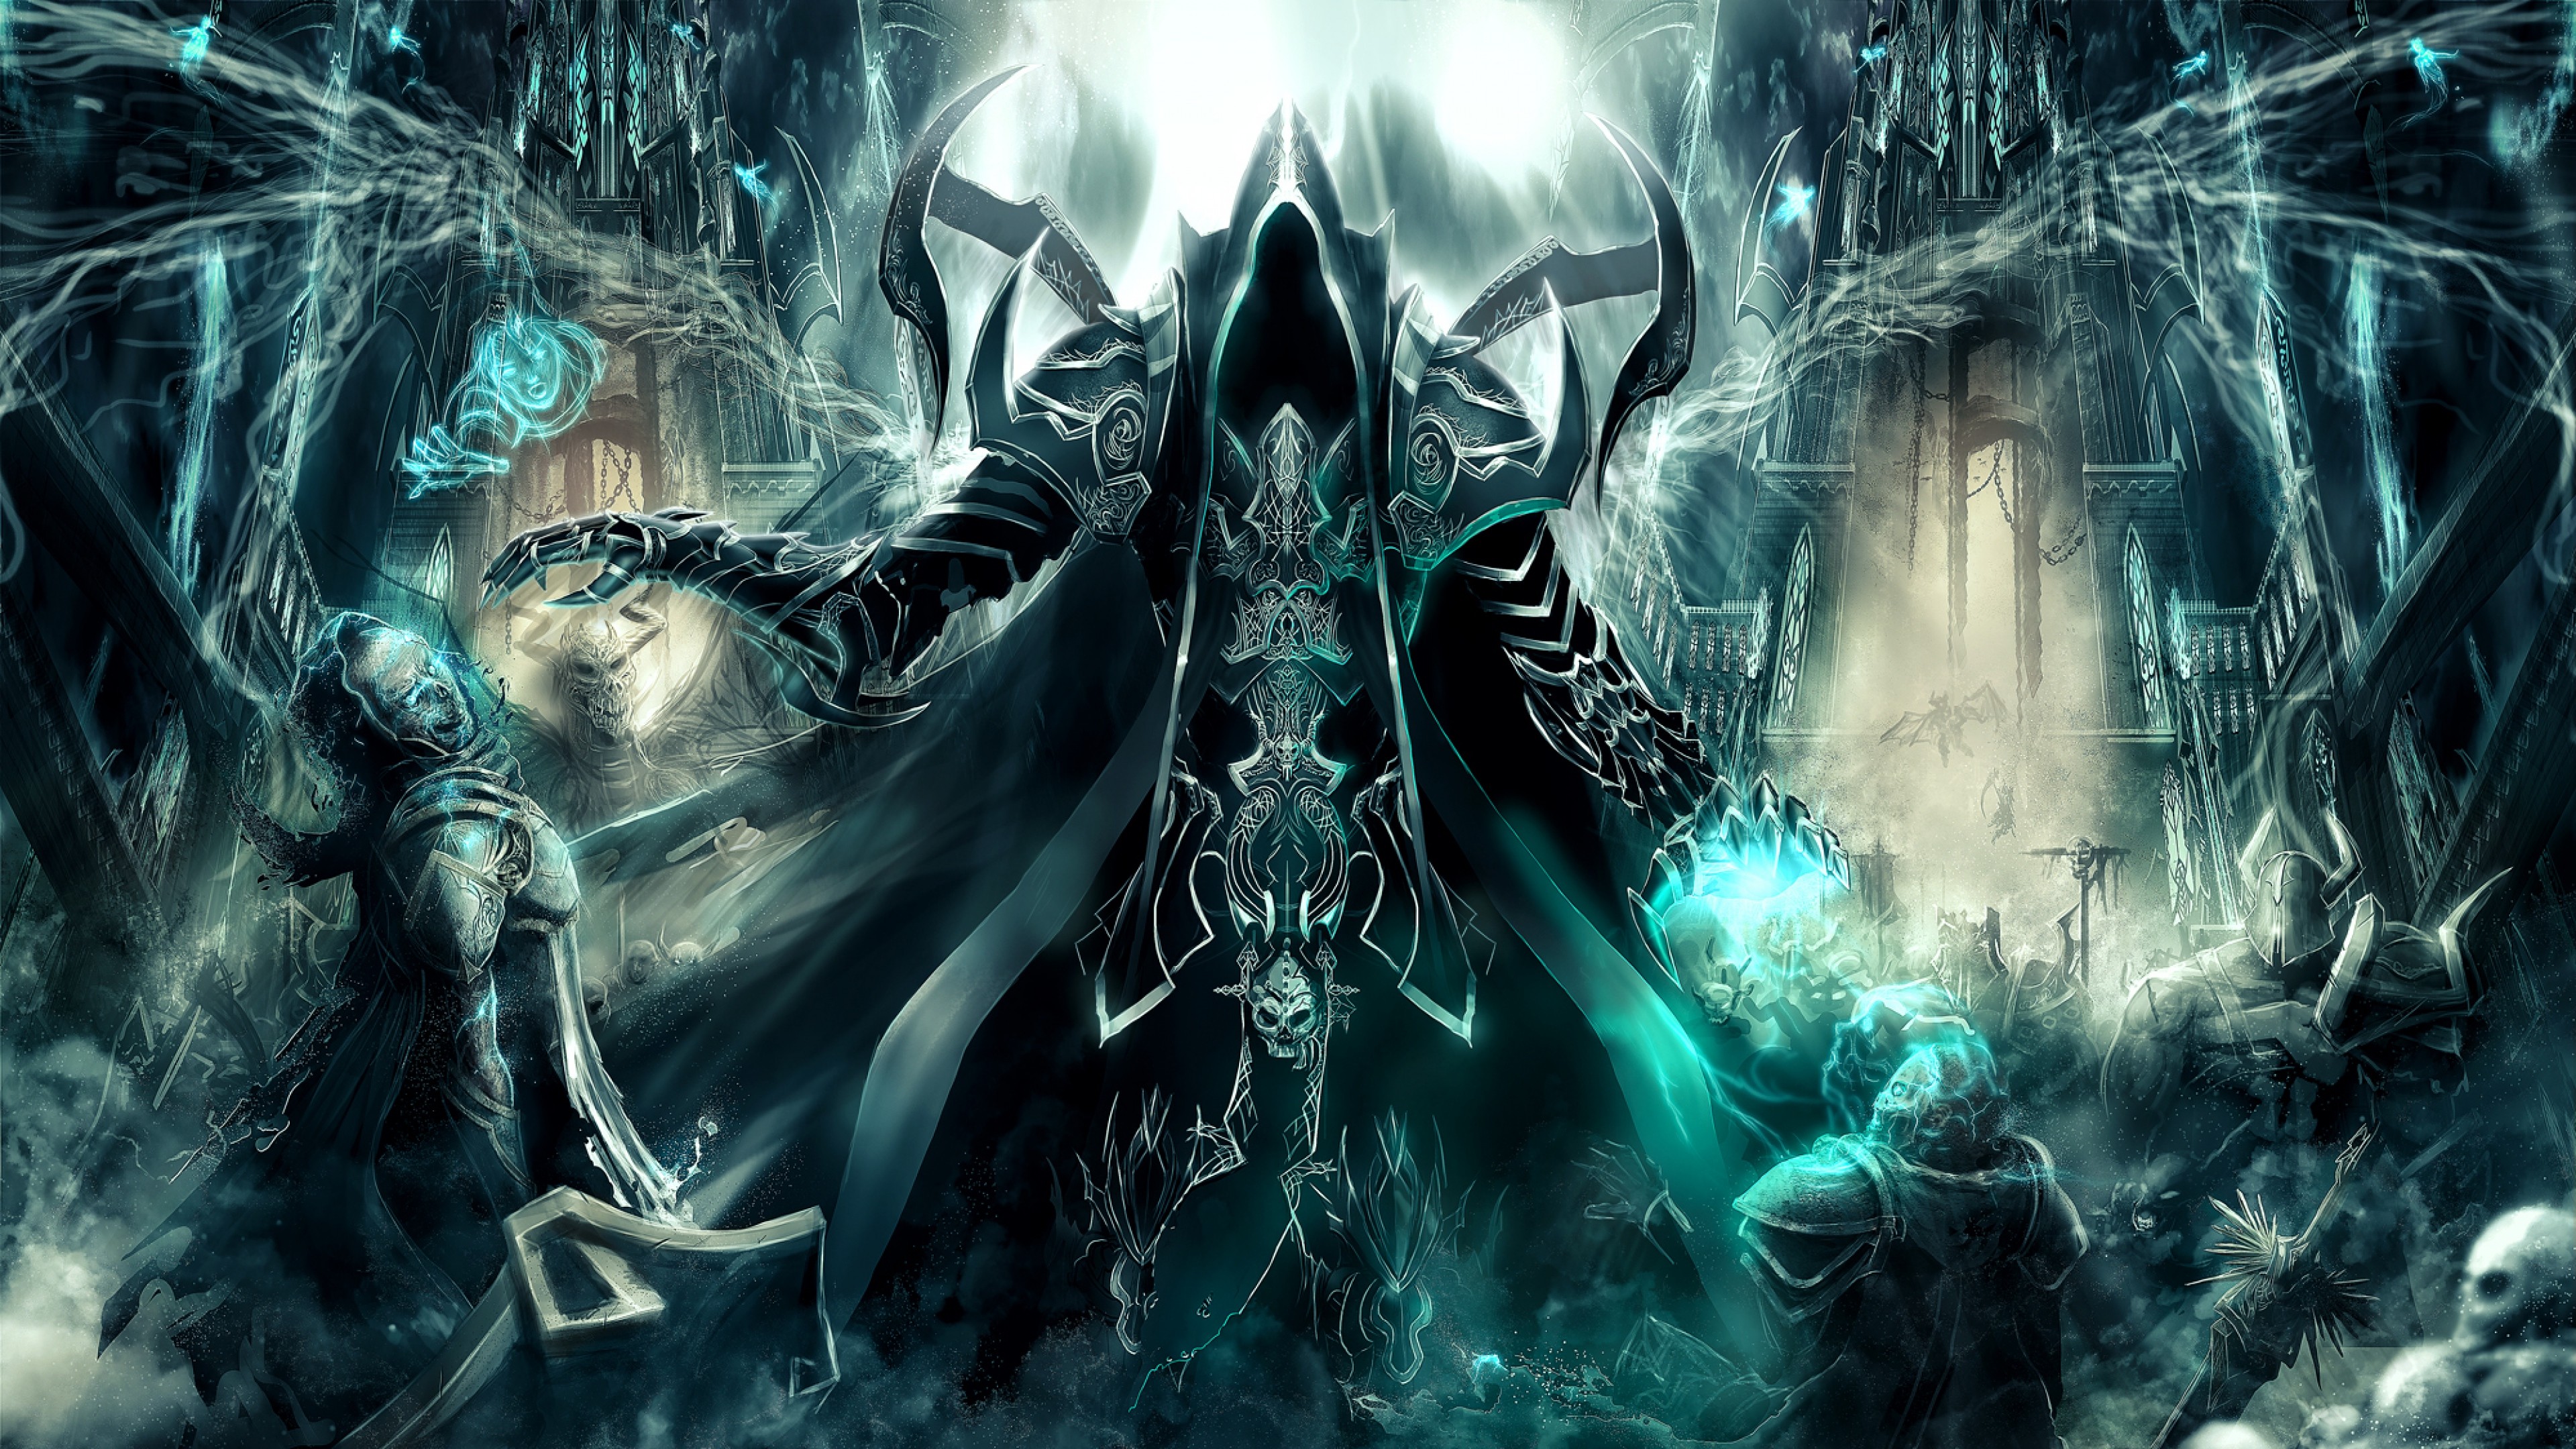 Game Hd Diablo 3 Images Hd Wallpapers Background Photos - Diablo 3 Wallpaper 4k - HD Wallpaper 